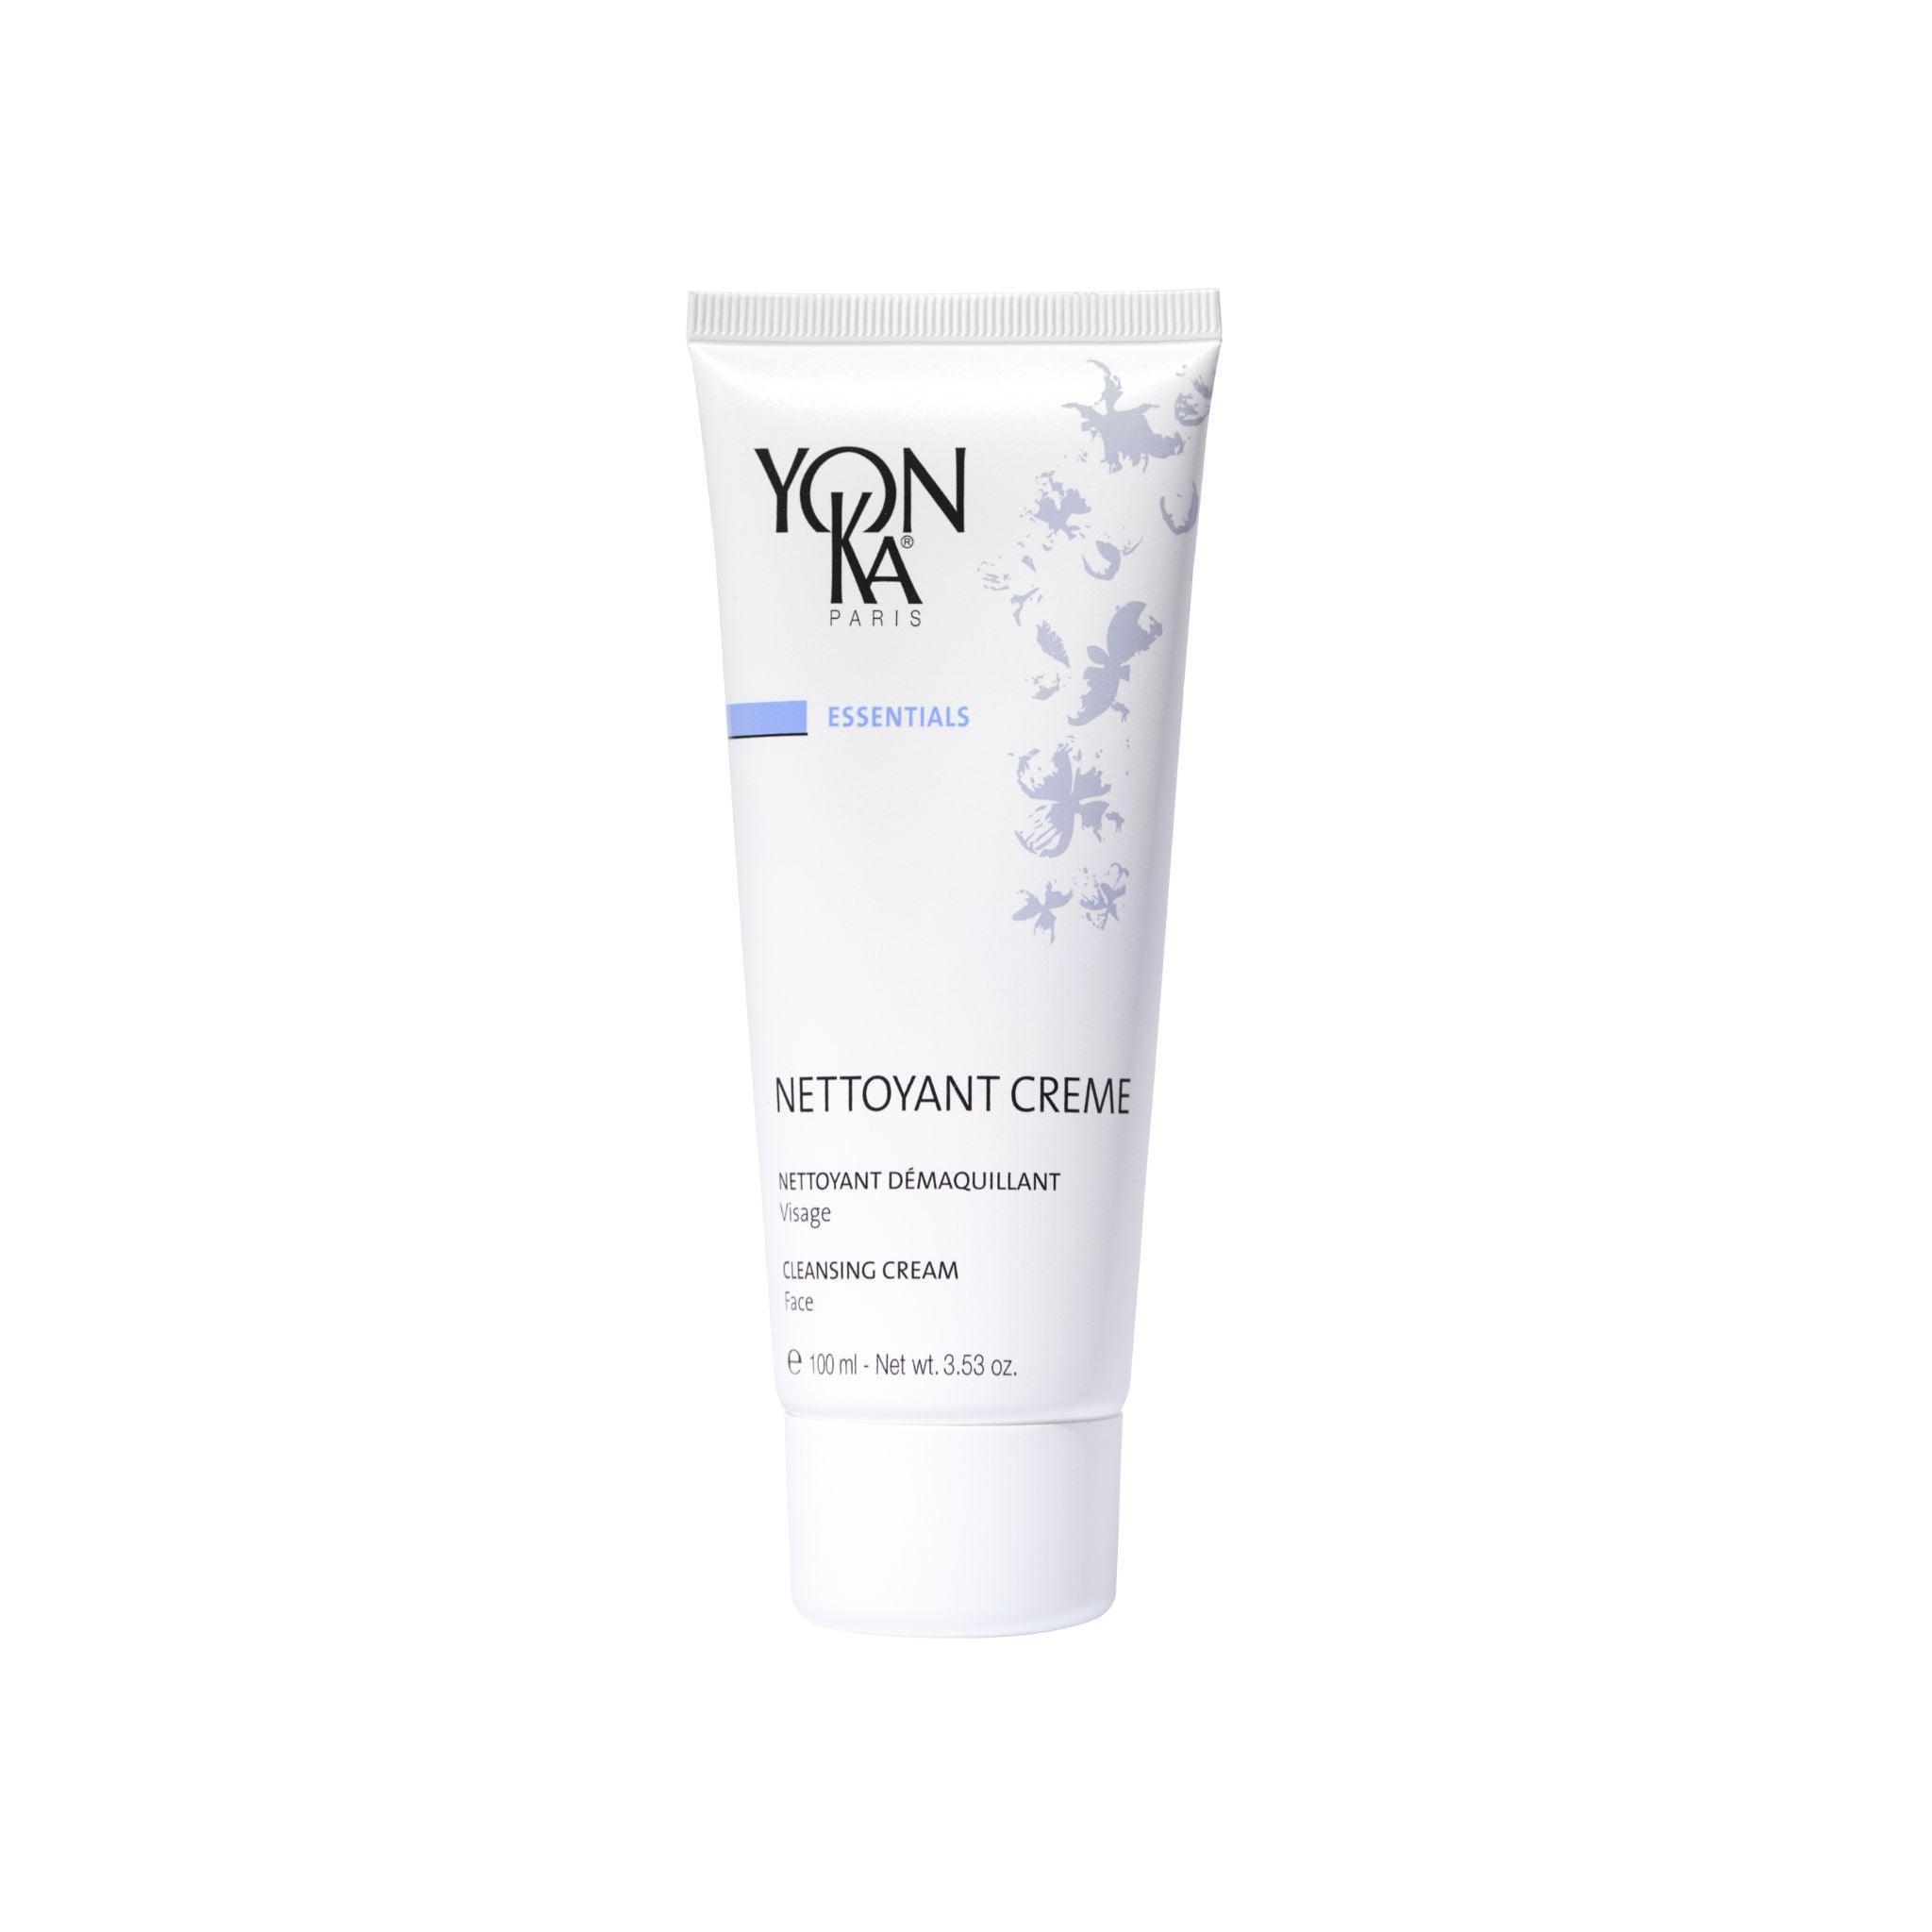 YonKa Nettoyant Creme (Cleansing Cream) - The Beauty House Shop